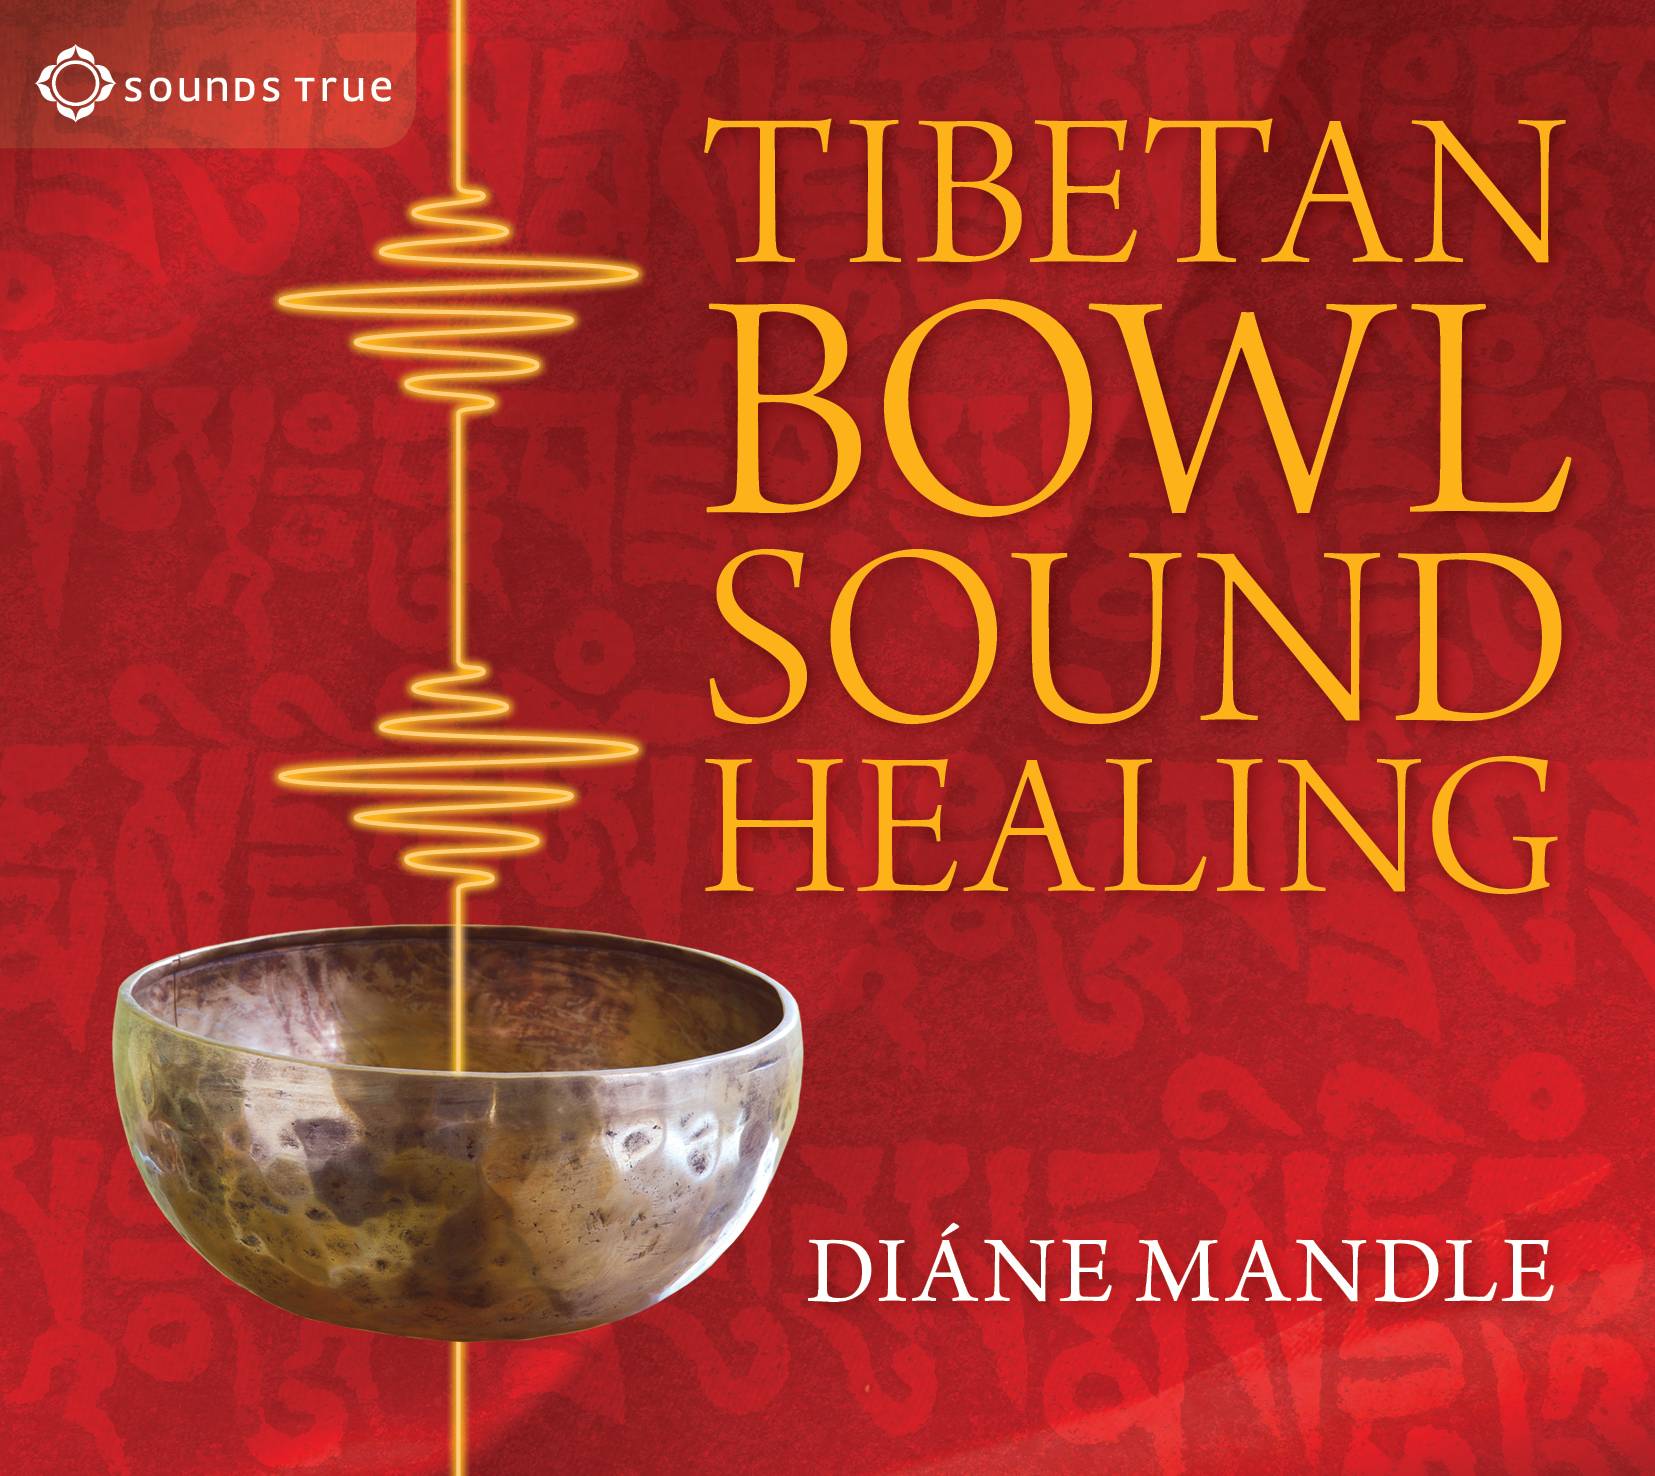 Tibetan bowl sound healing - natural therapeutic sound for attuning to stil